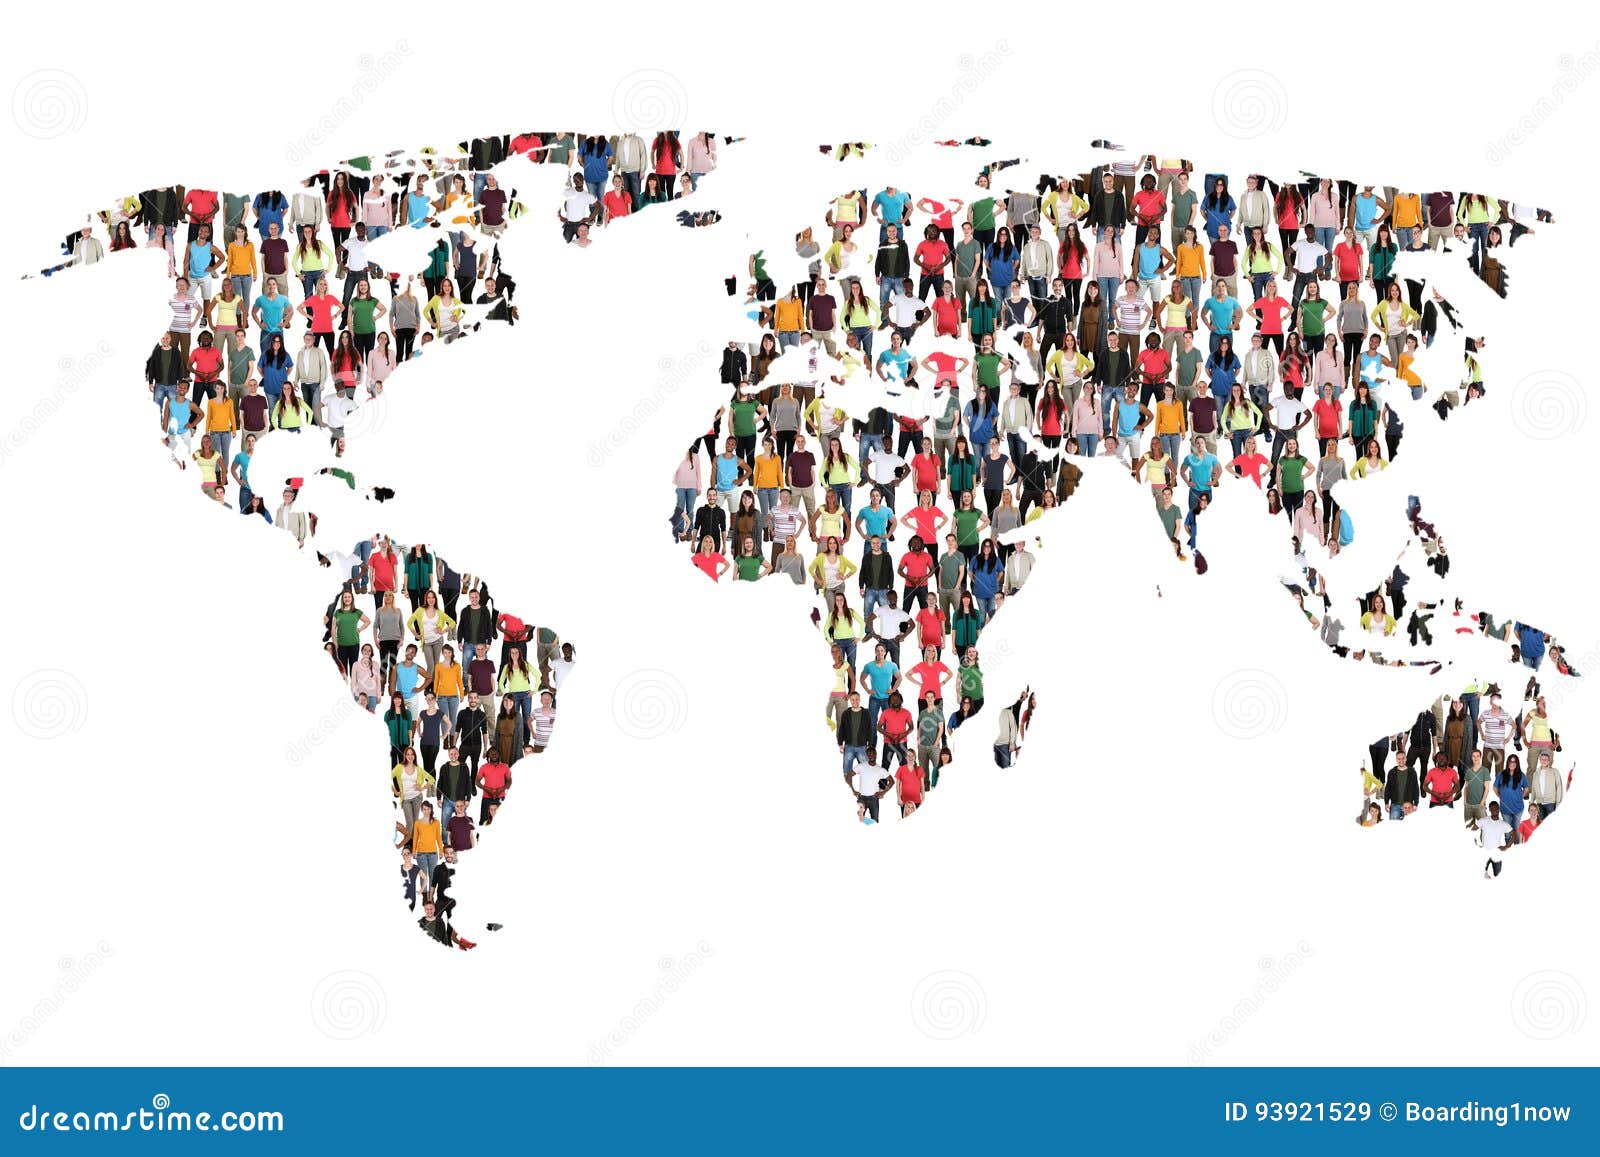 world map earth multicultural group of people integration immigration diversity